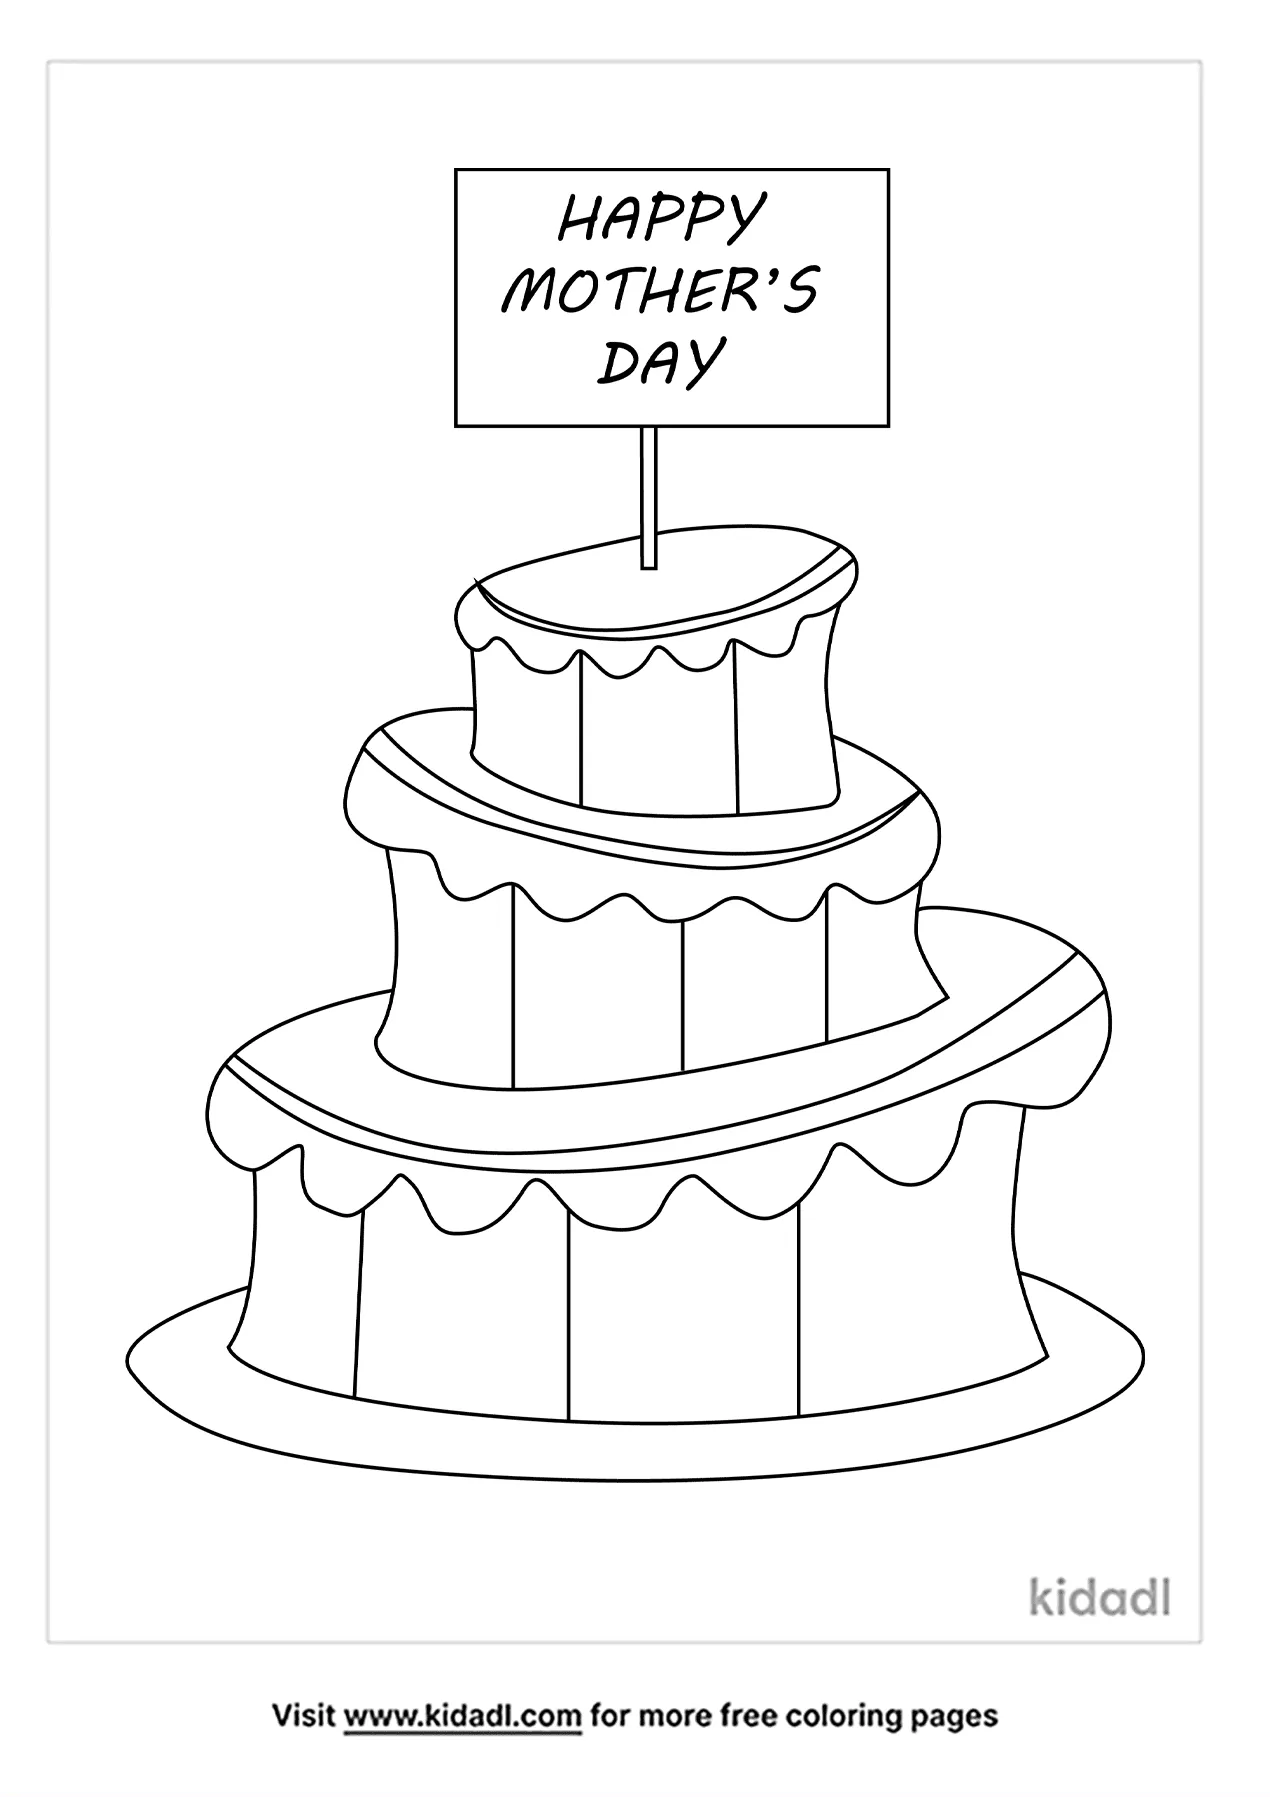 Surprise Dad with a unique Father's Day cake poster design